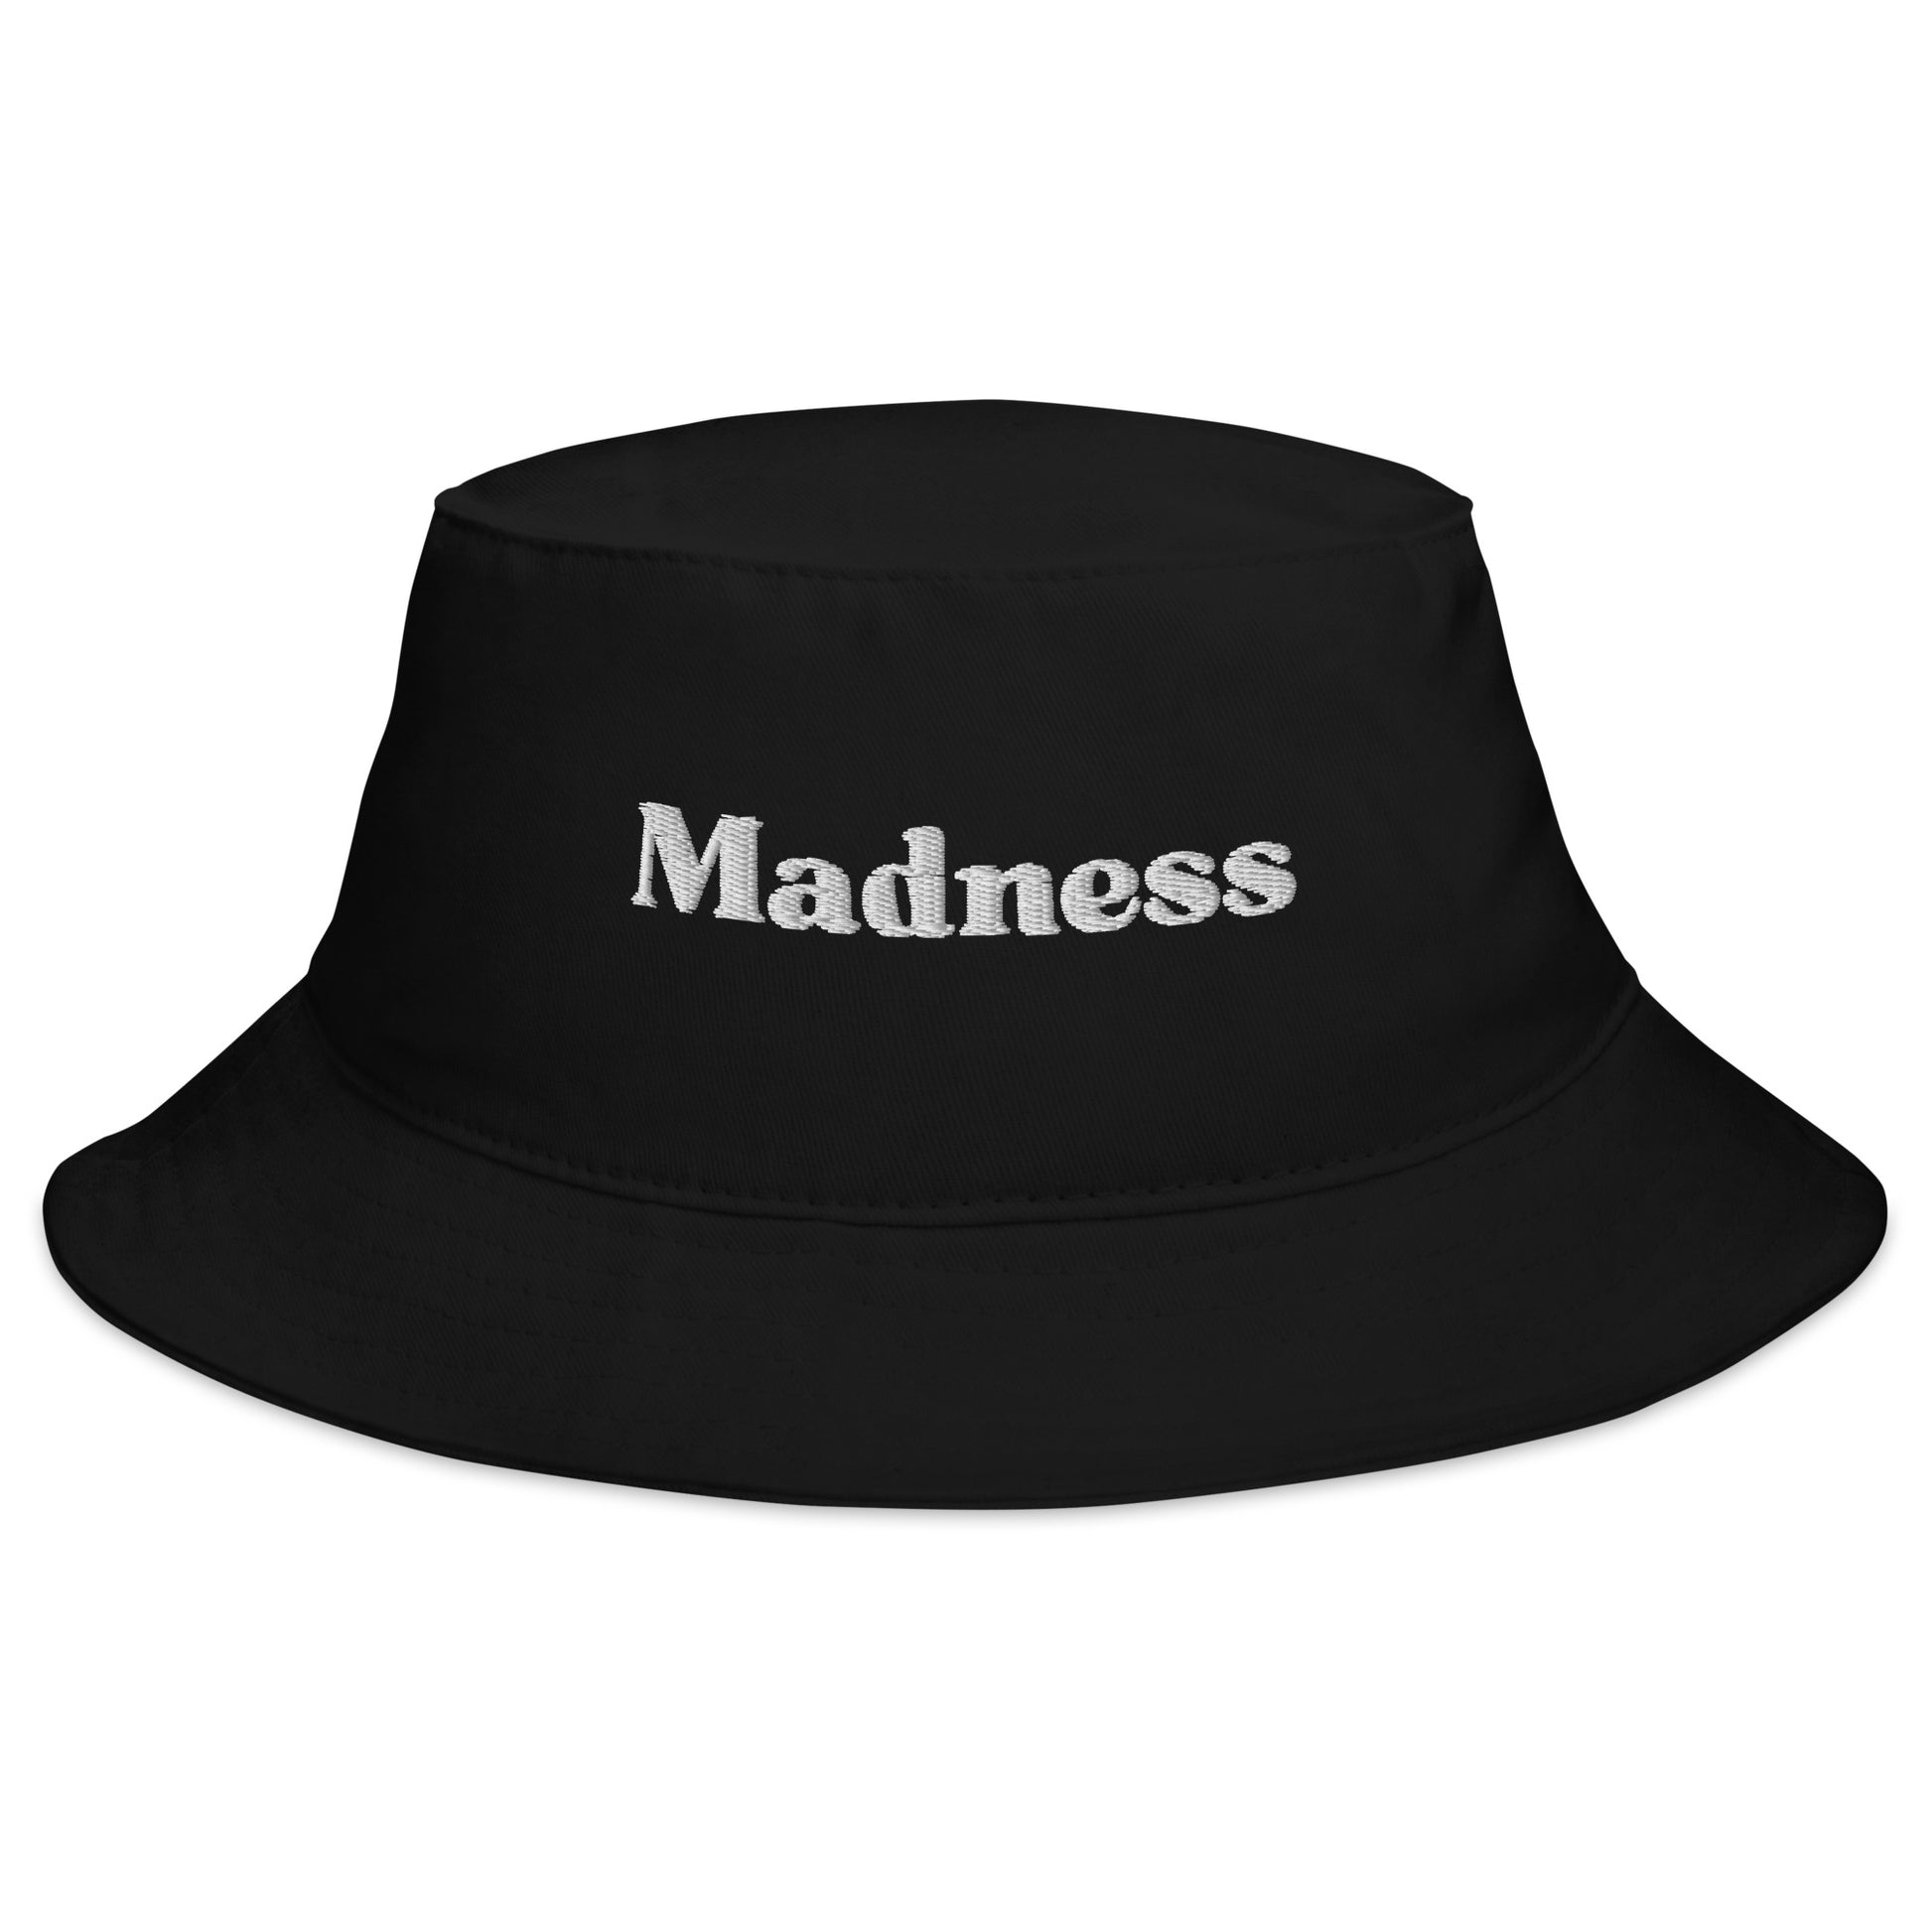 Madness Bucket Hat  Bucket Hat Central